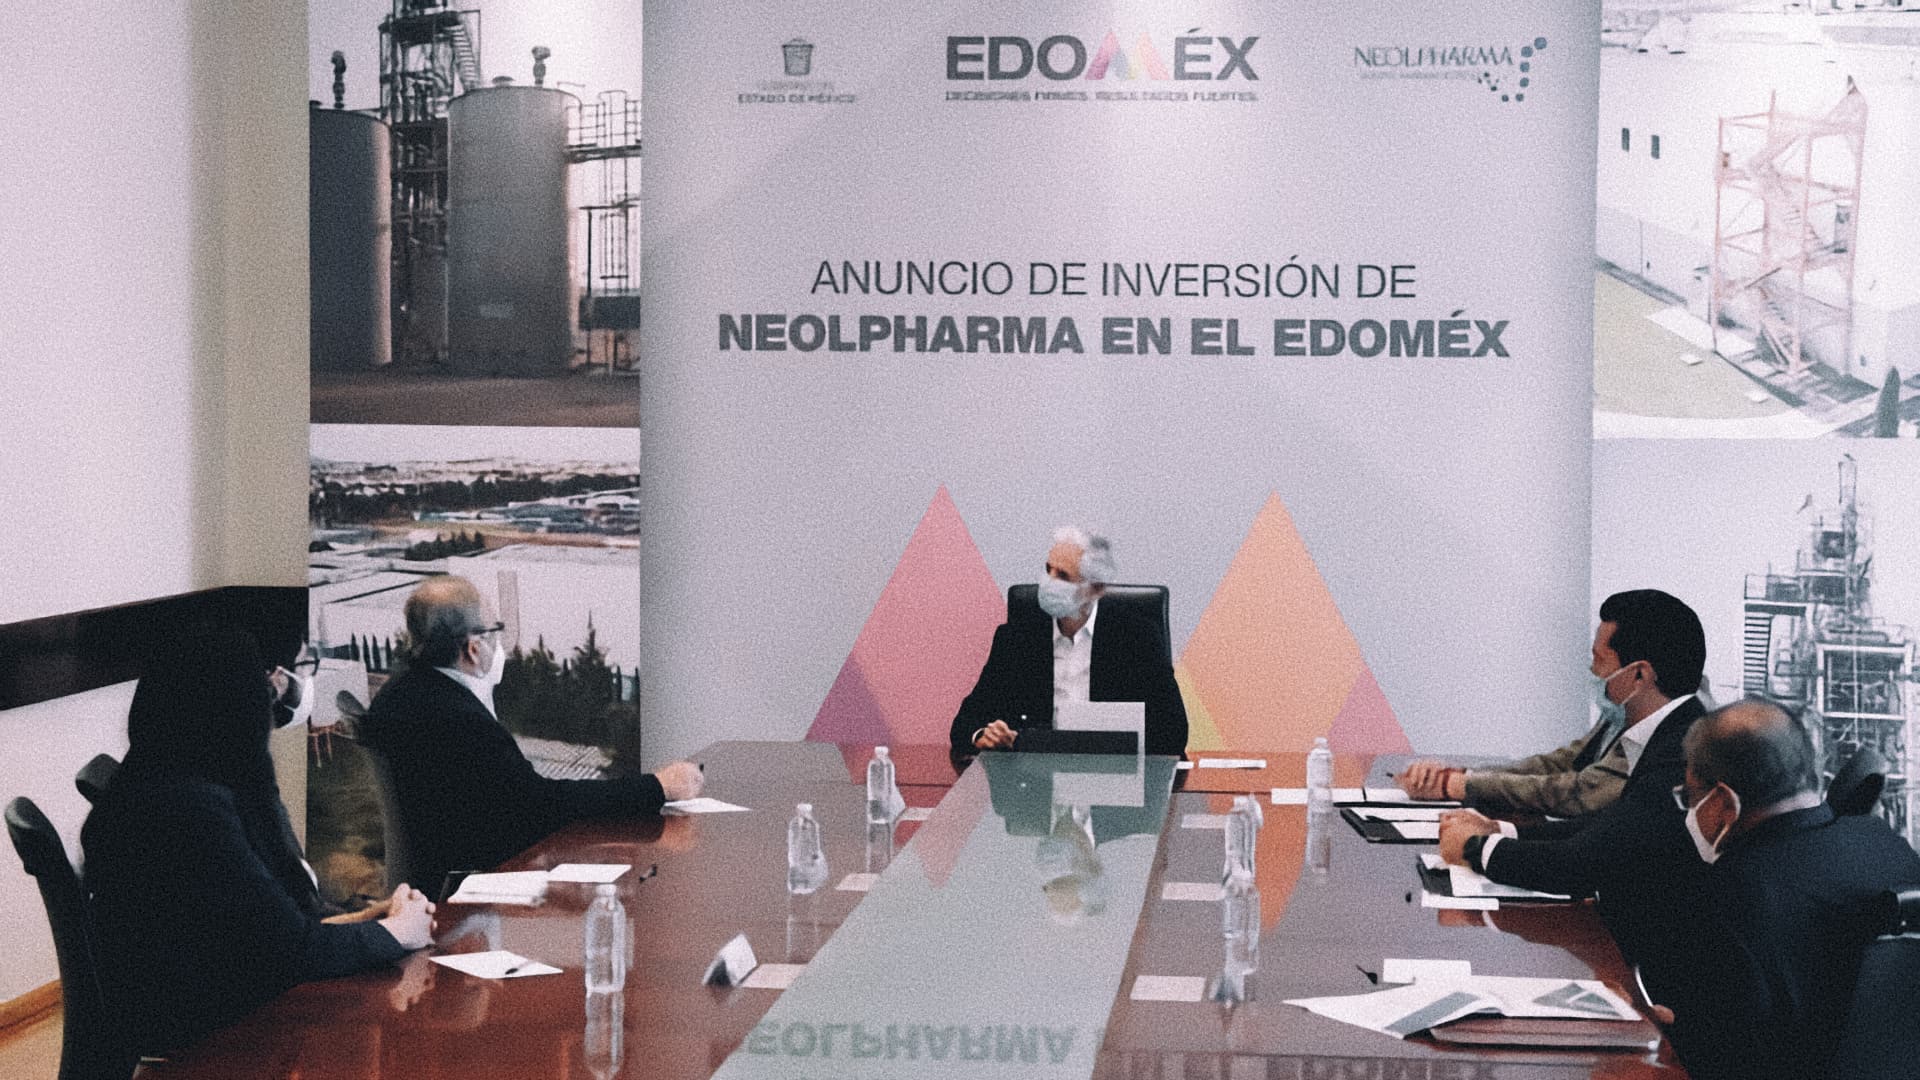 New investment of the pharmaceutical sector in the State of Mexico